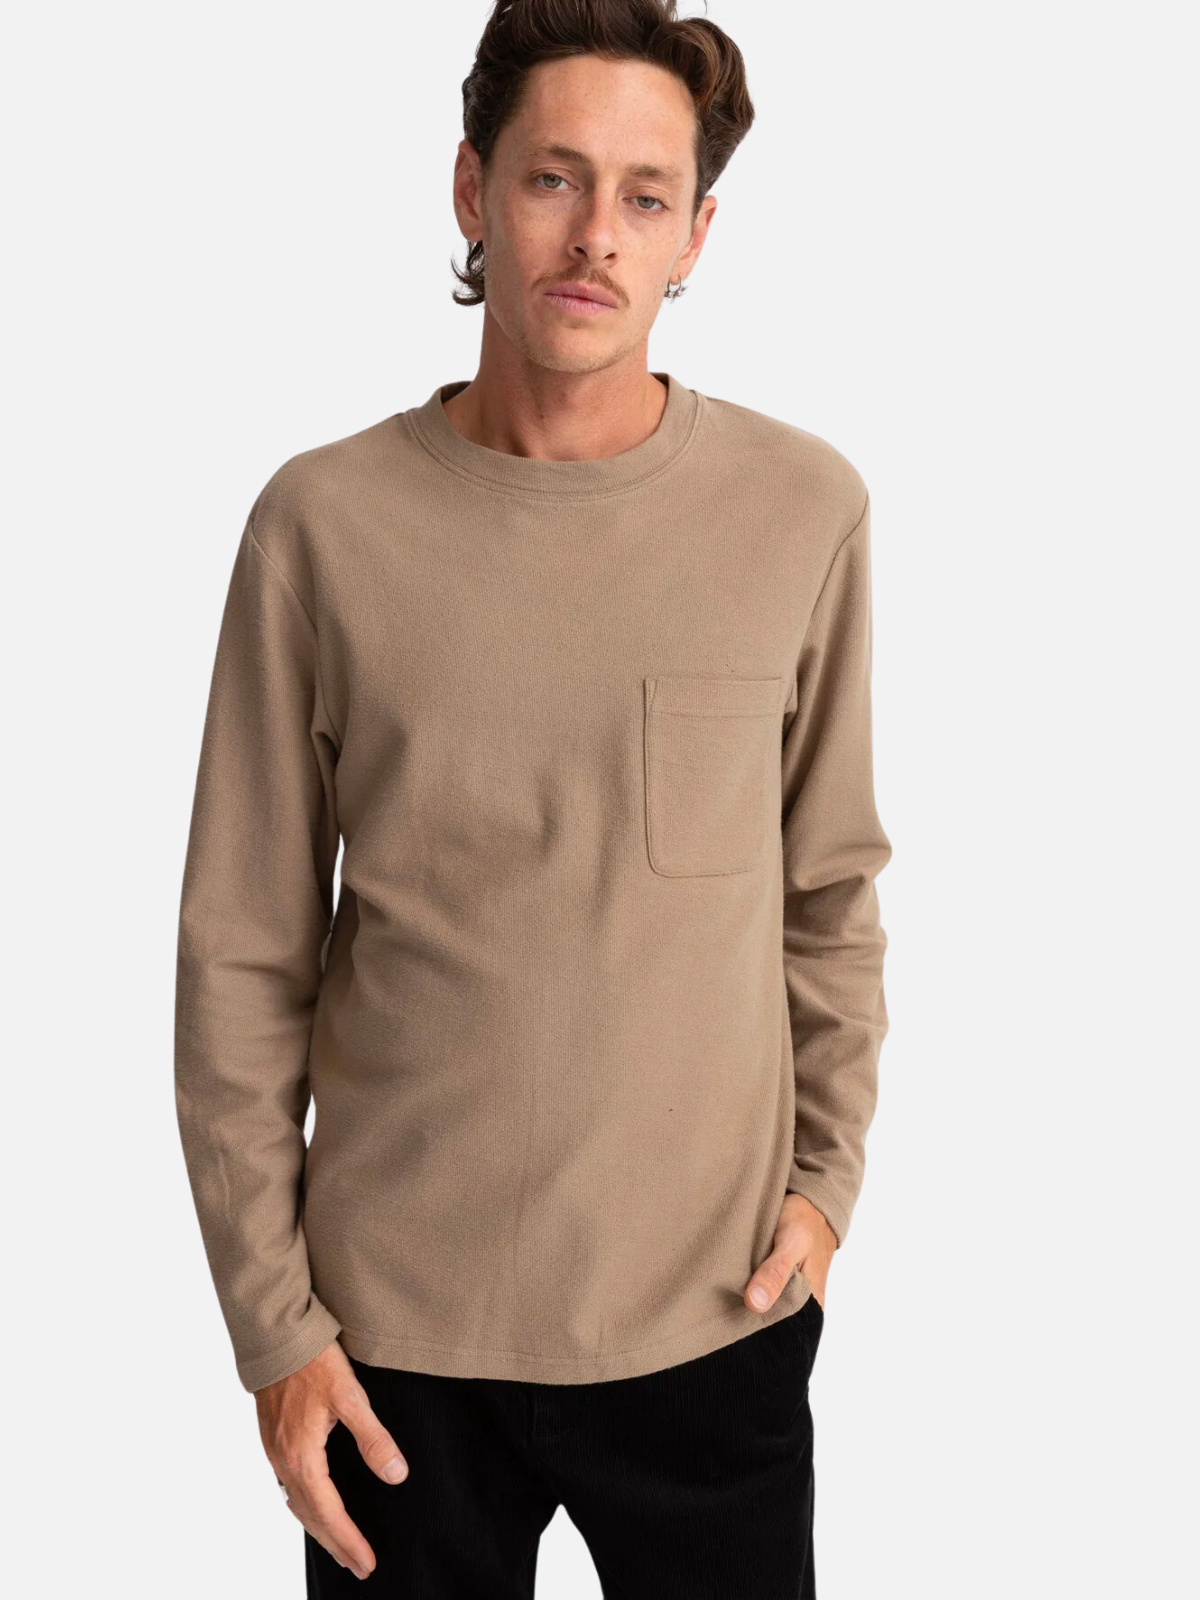 Rhythm Vintage Textured LS T-Shirt Moonrock Longsleeve Kempt Mens Clothing Store Athens Georgia Holiday Gifts for Guys